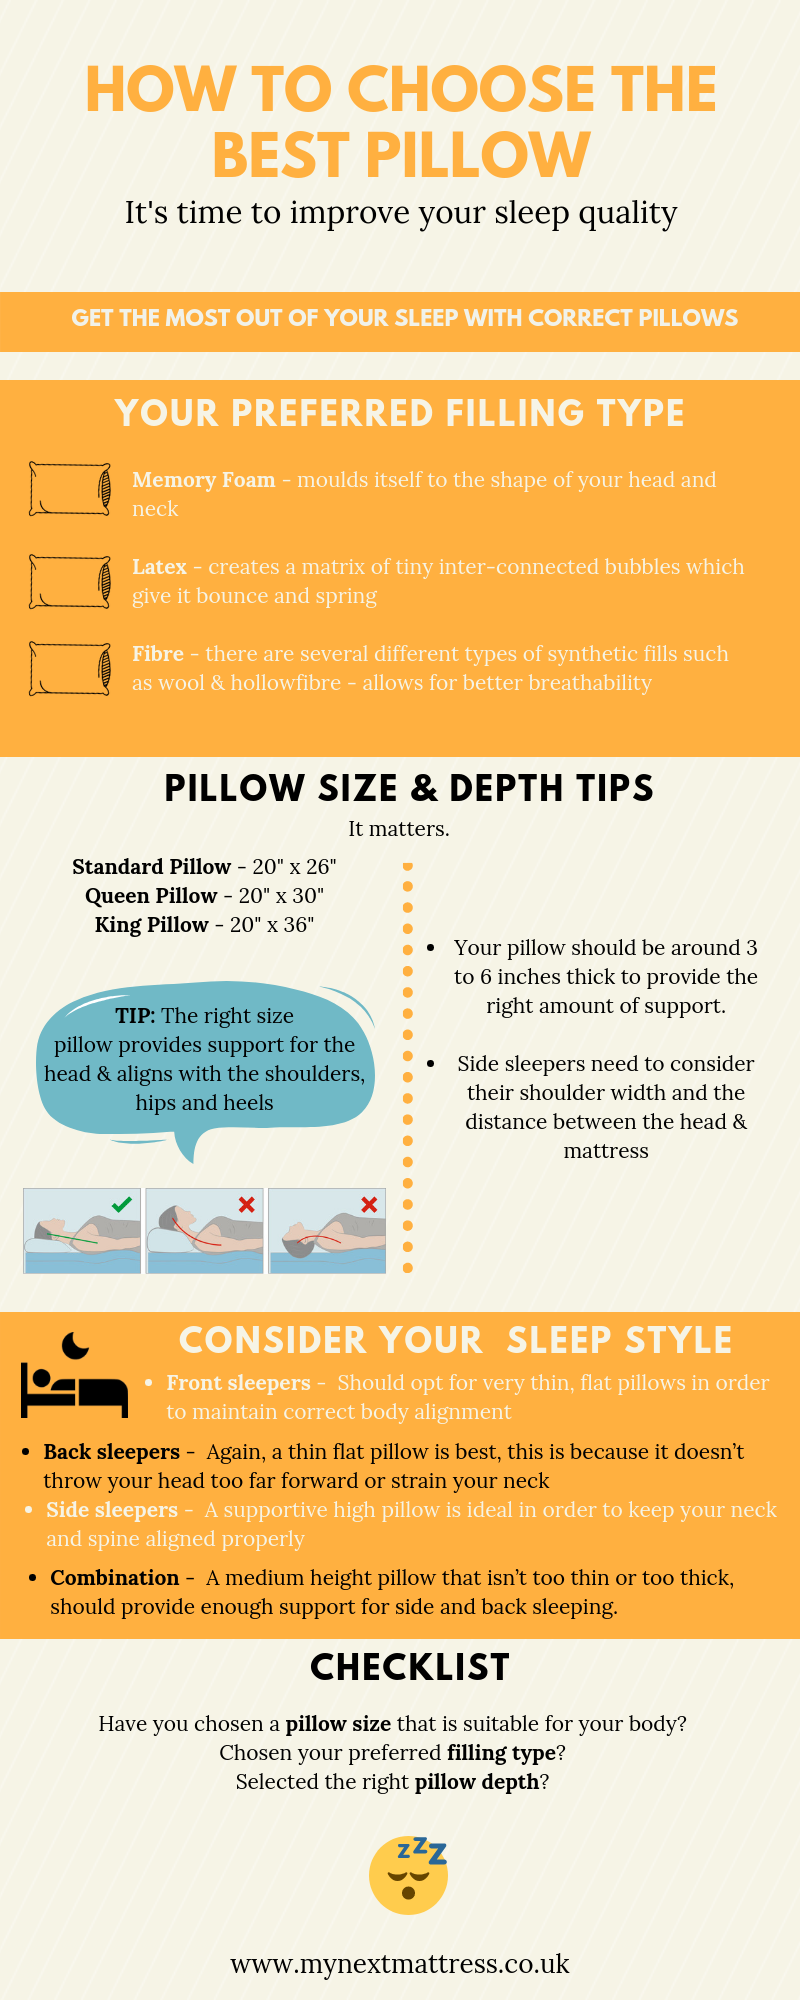 how to choose the best pillow infographic - my next mattress